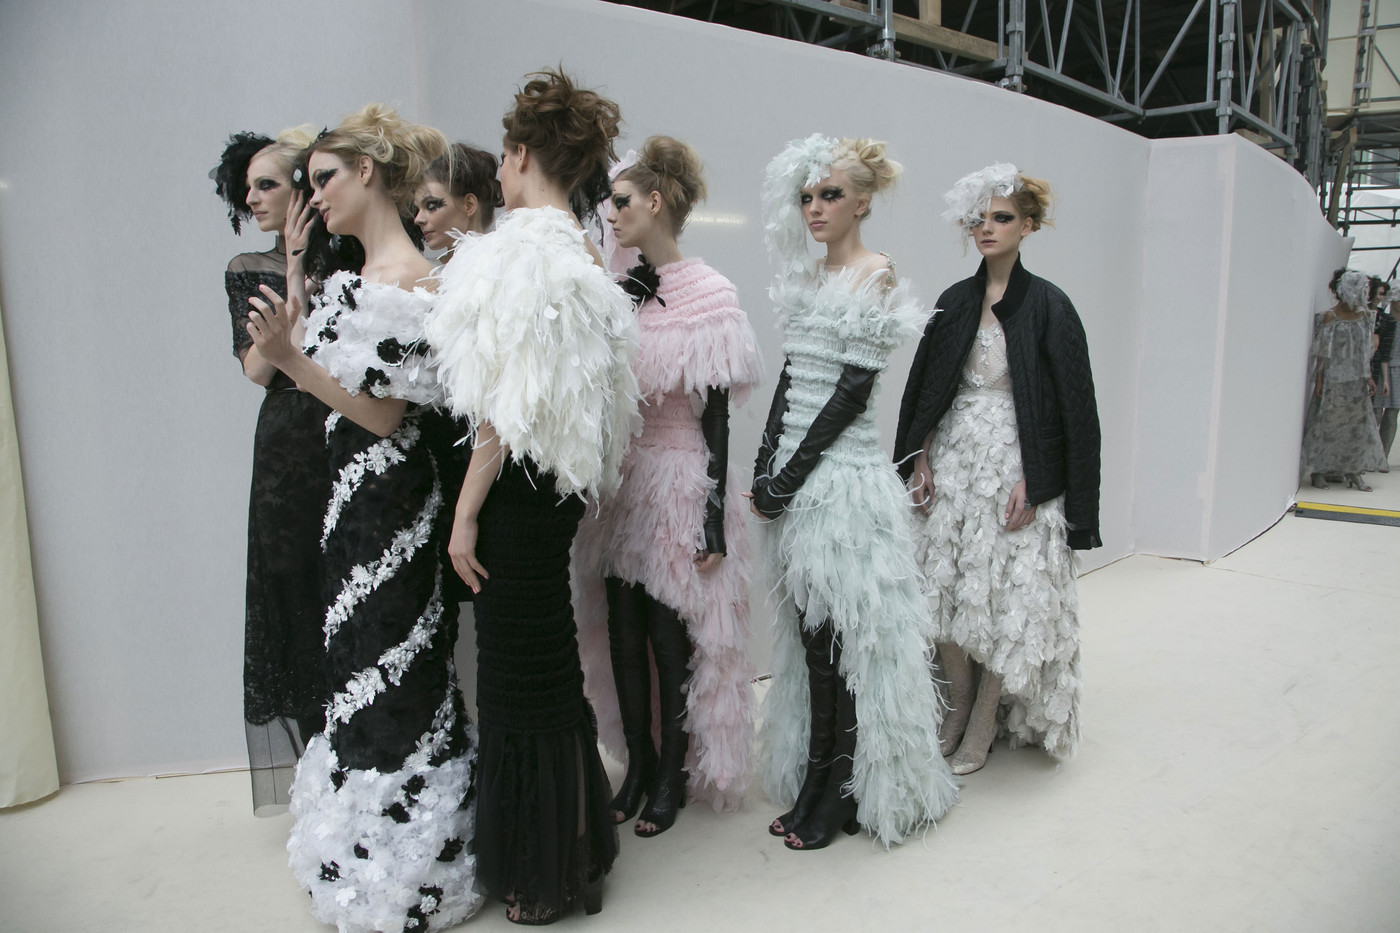 Chanel Spring 2013 Backstage Ss 07 S 4 d Kd EYx